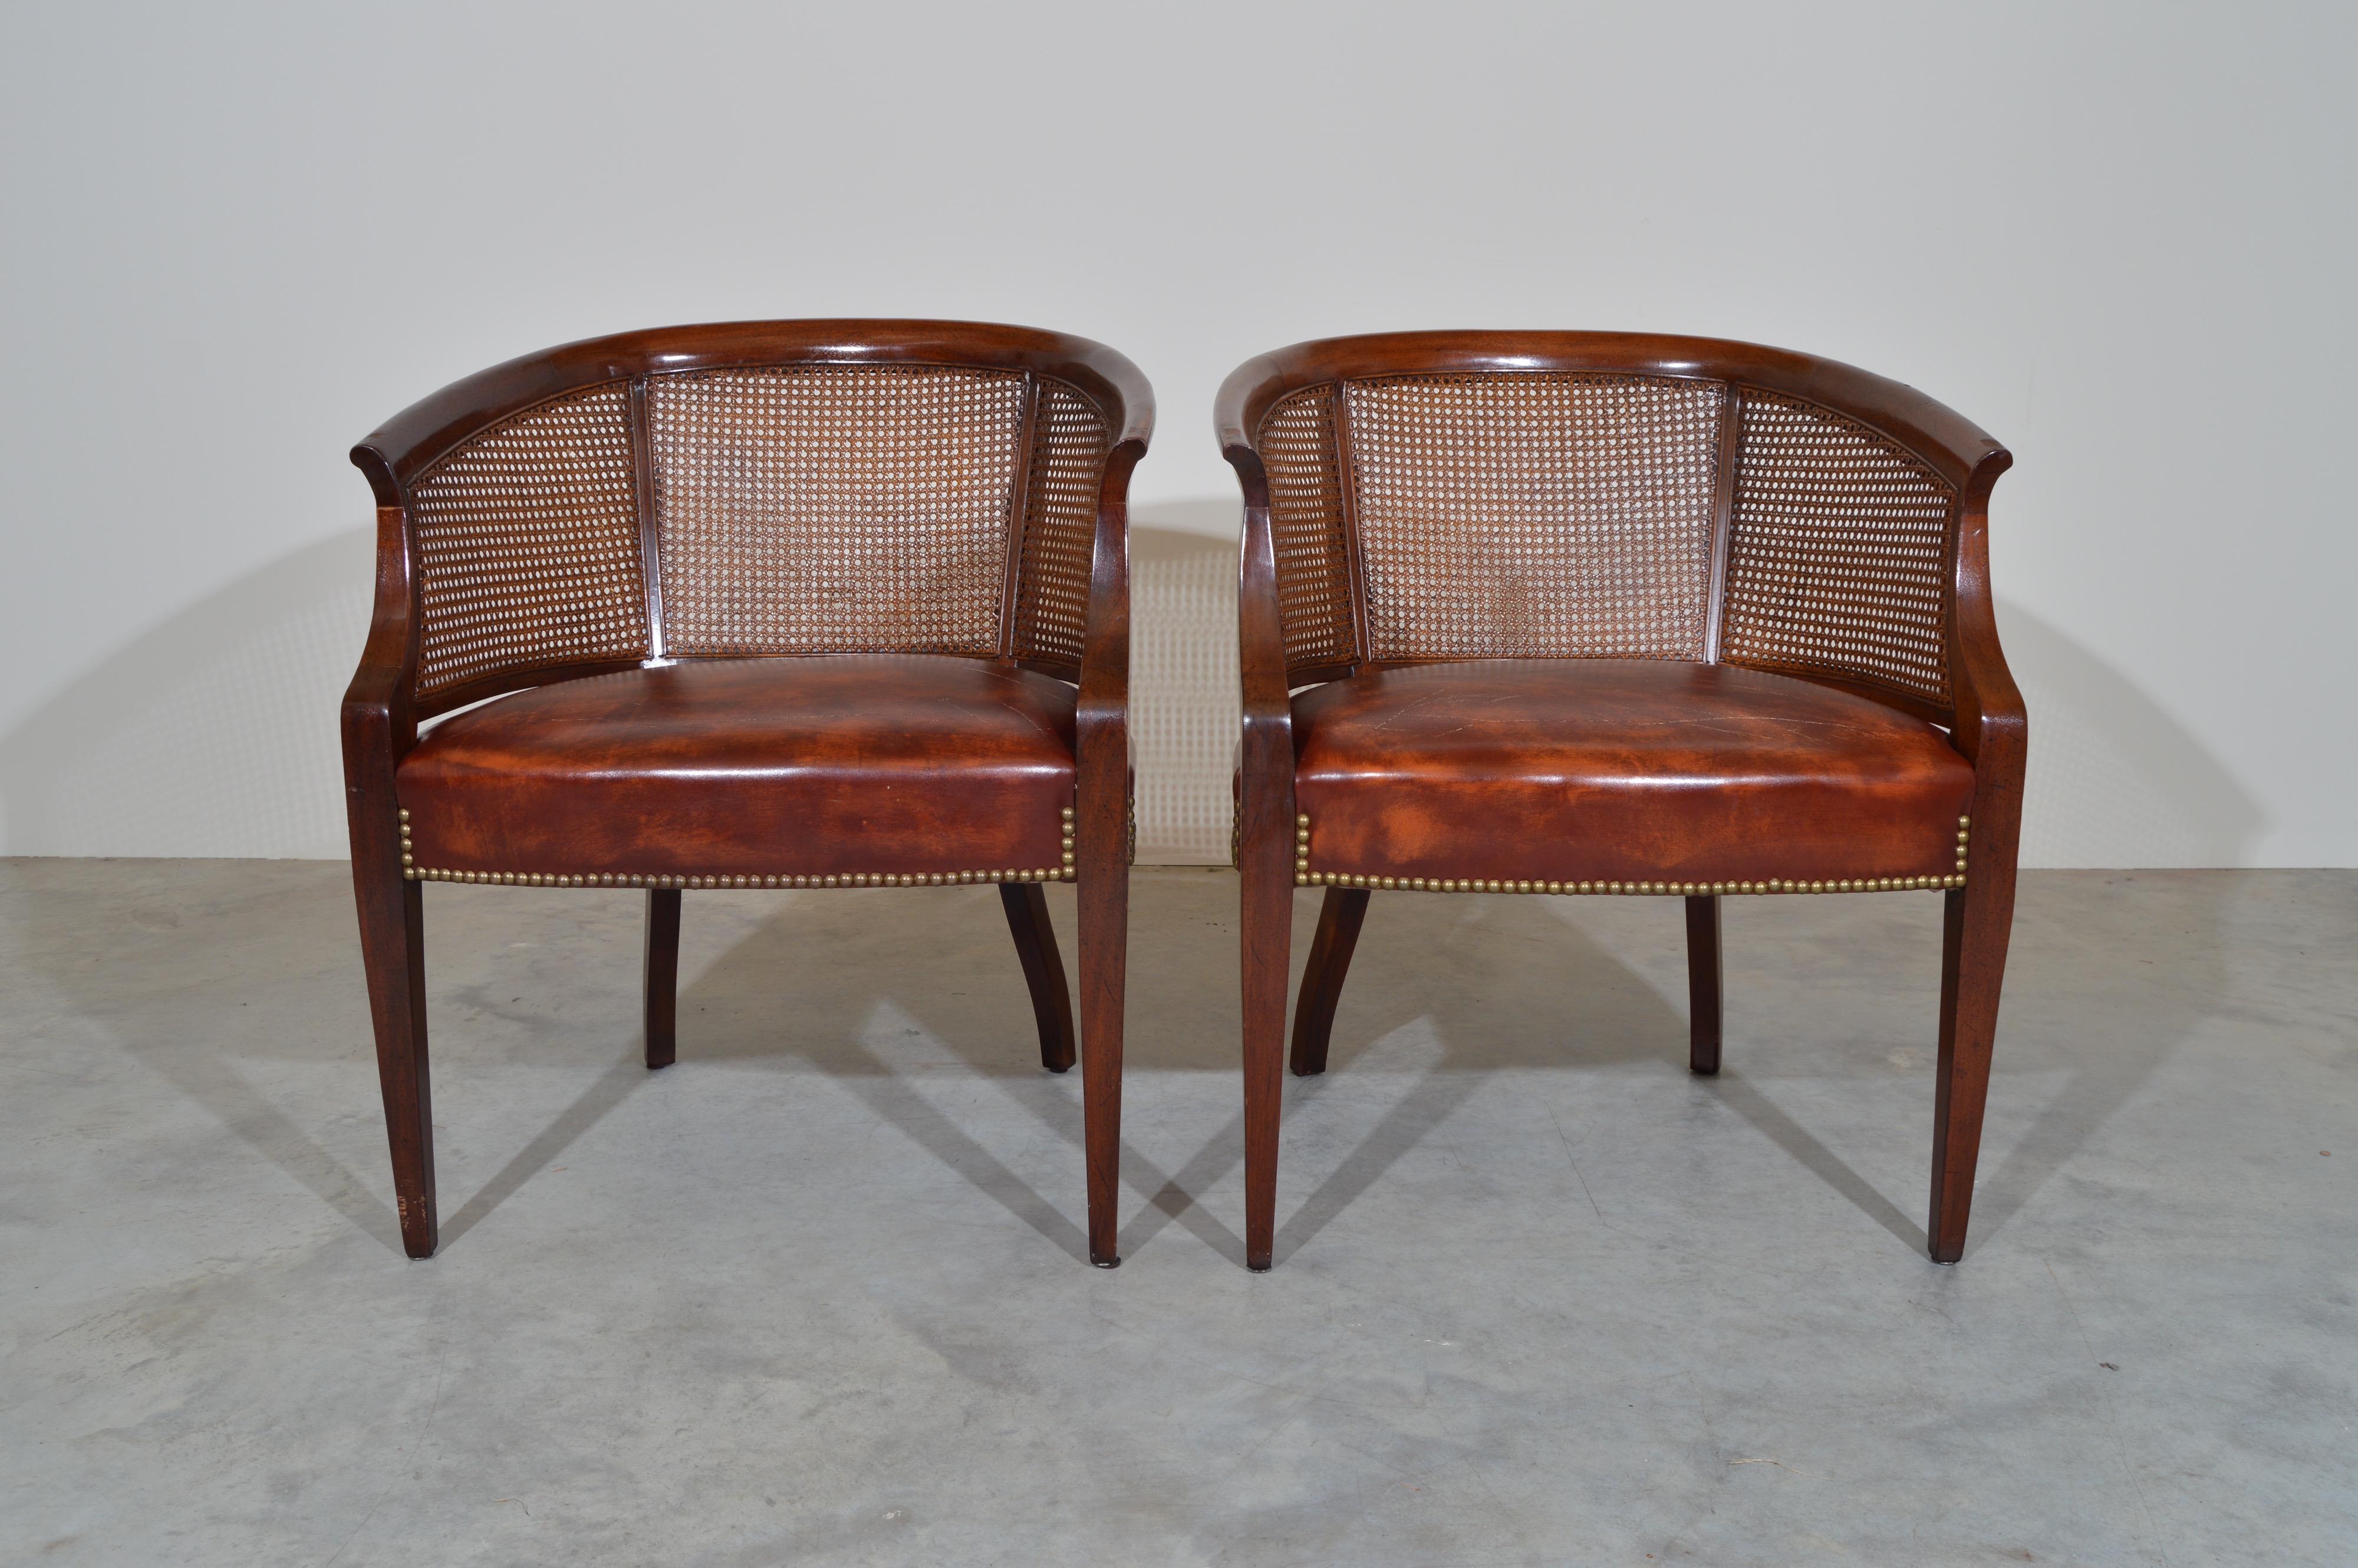 A beautiful matched pair of cane barrel back club chairs with lithe front legs by Hickory Chair Co. with an incredibly convincing original faux leather. 1974 production. 
Beautiful, clean condition. 
We have 2 identical pairs available.